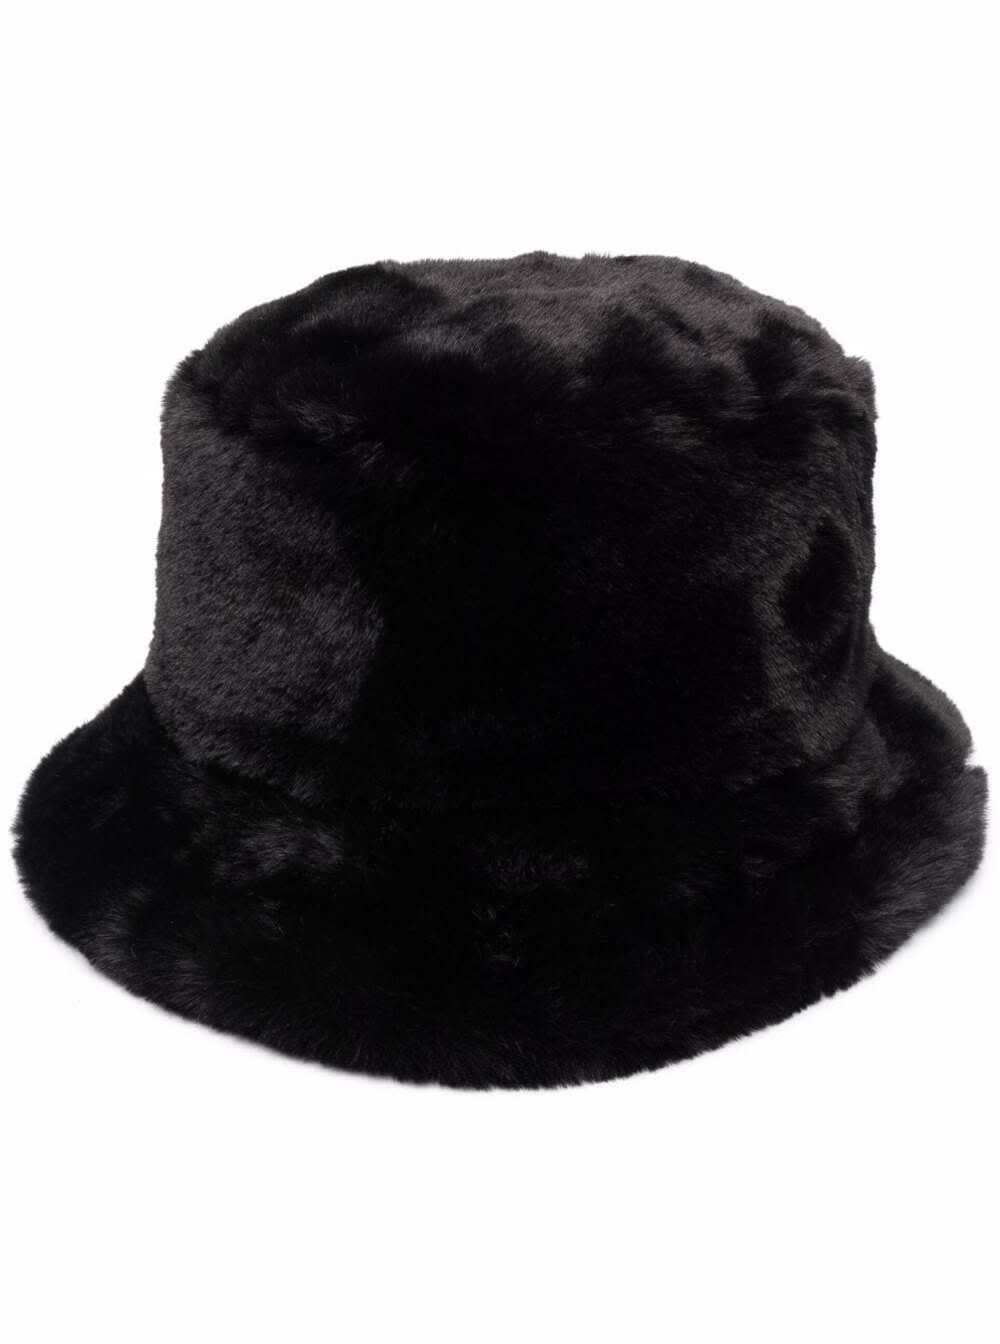 RED Valentino Faux Fur Bucket Hat